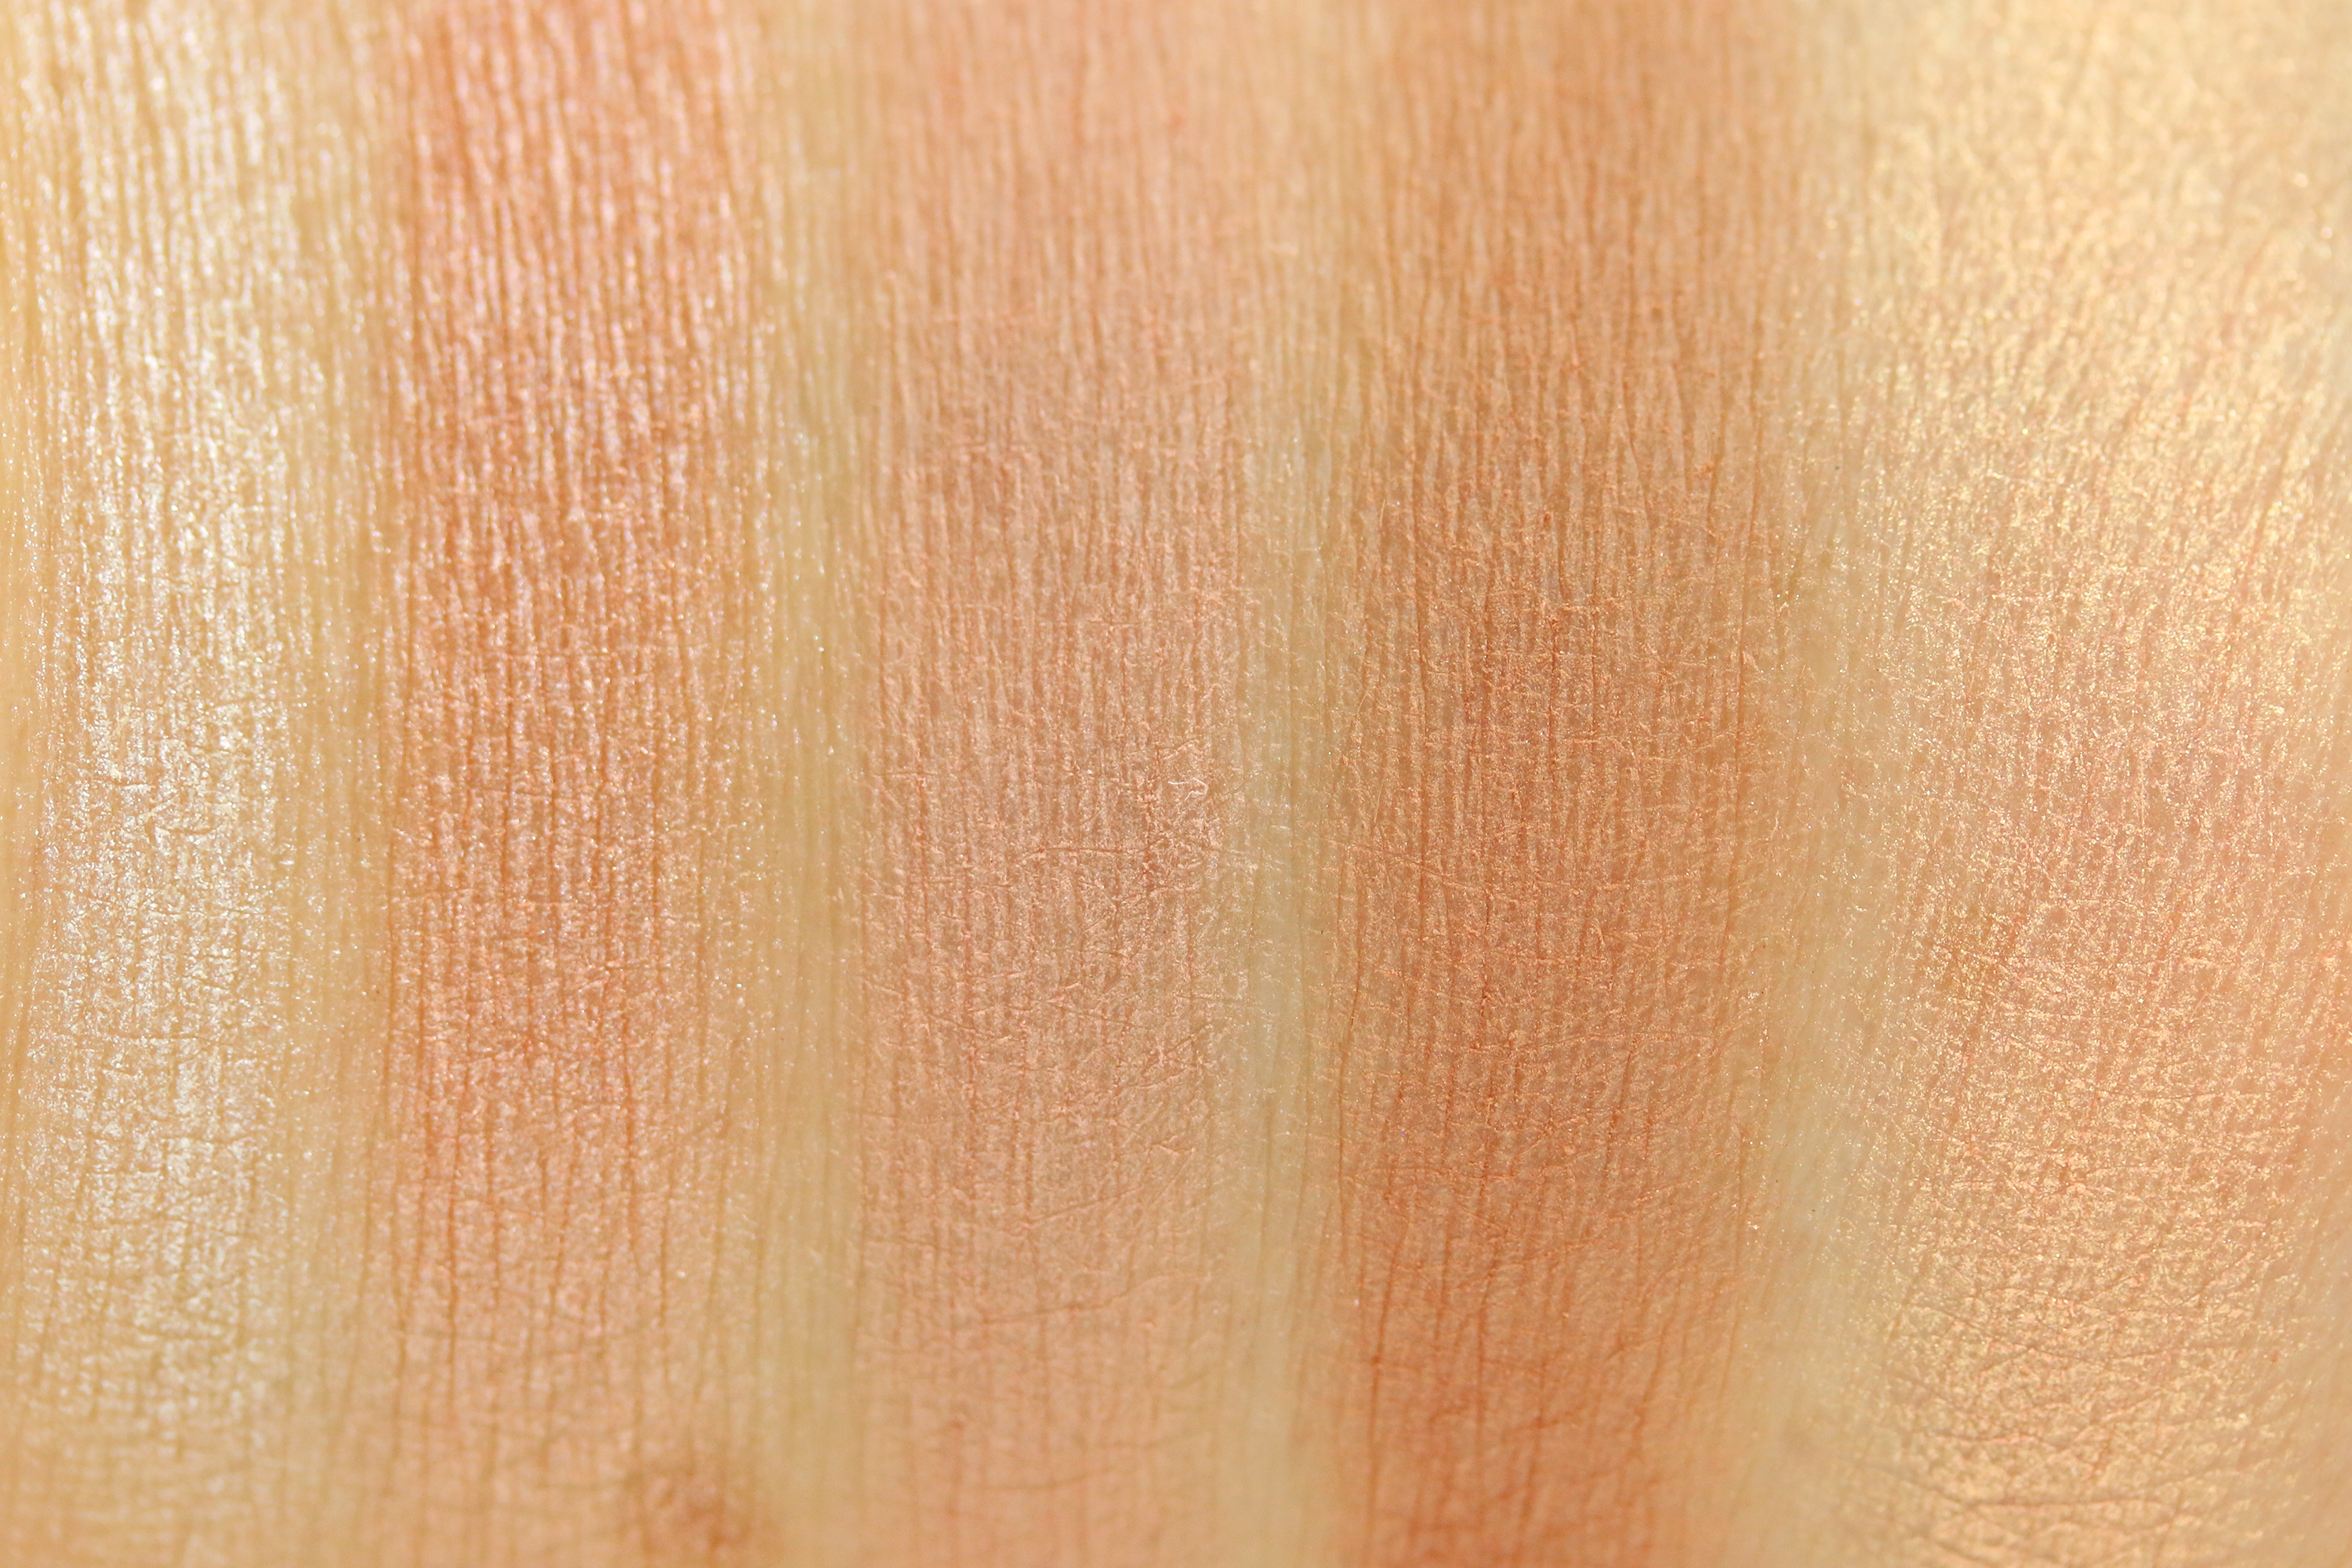 Loreal La Palette Nude Rose Swatches